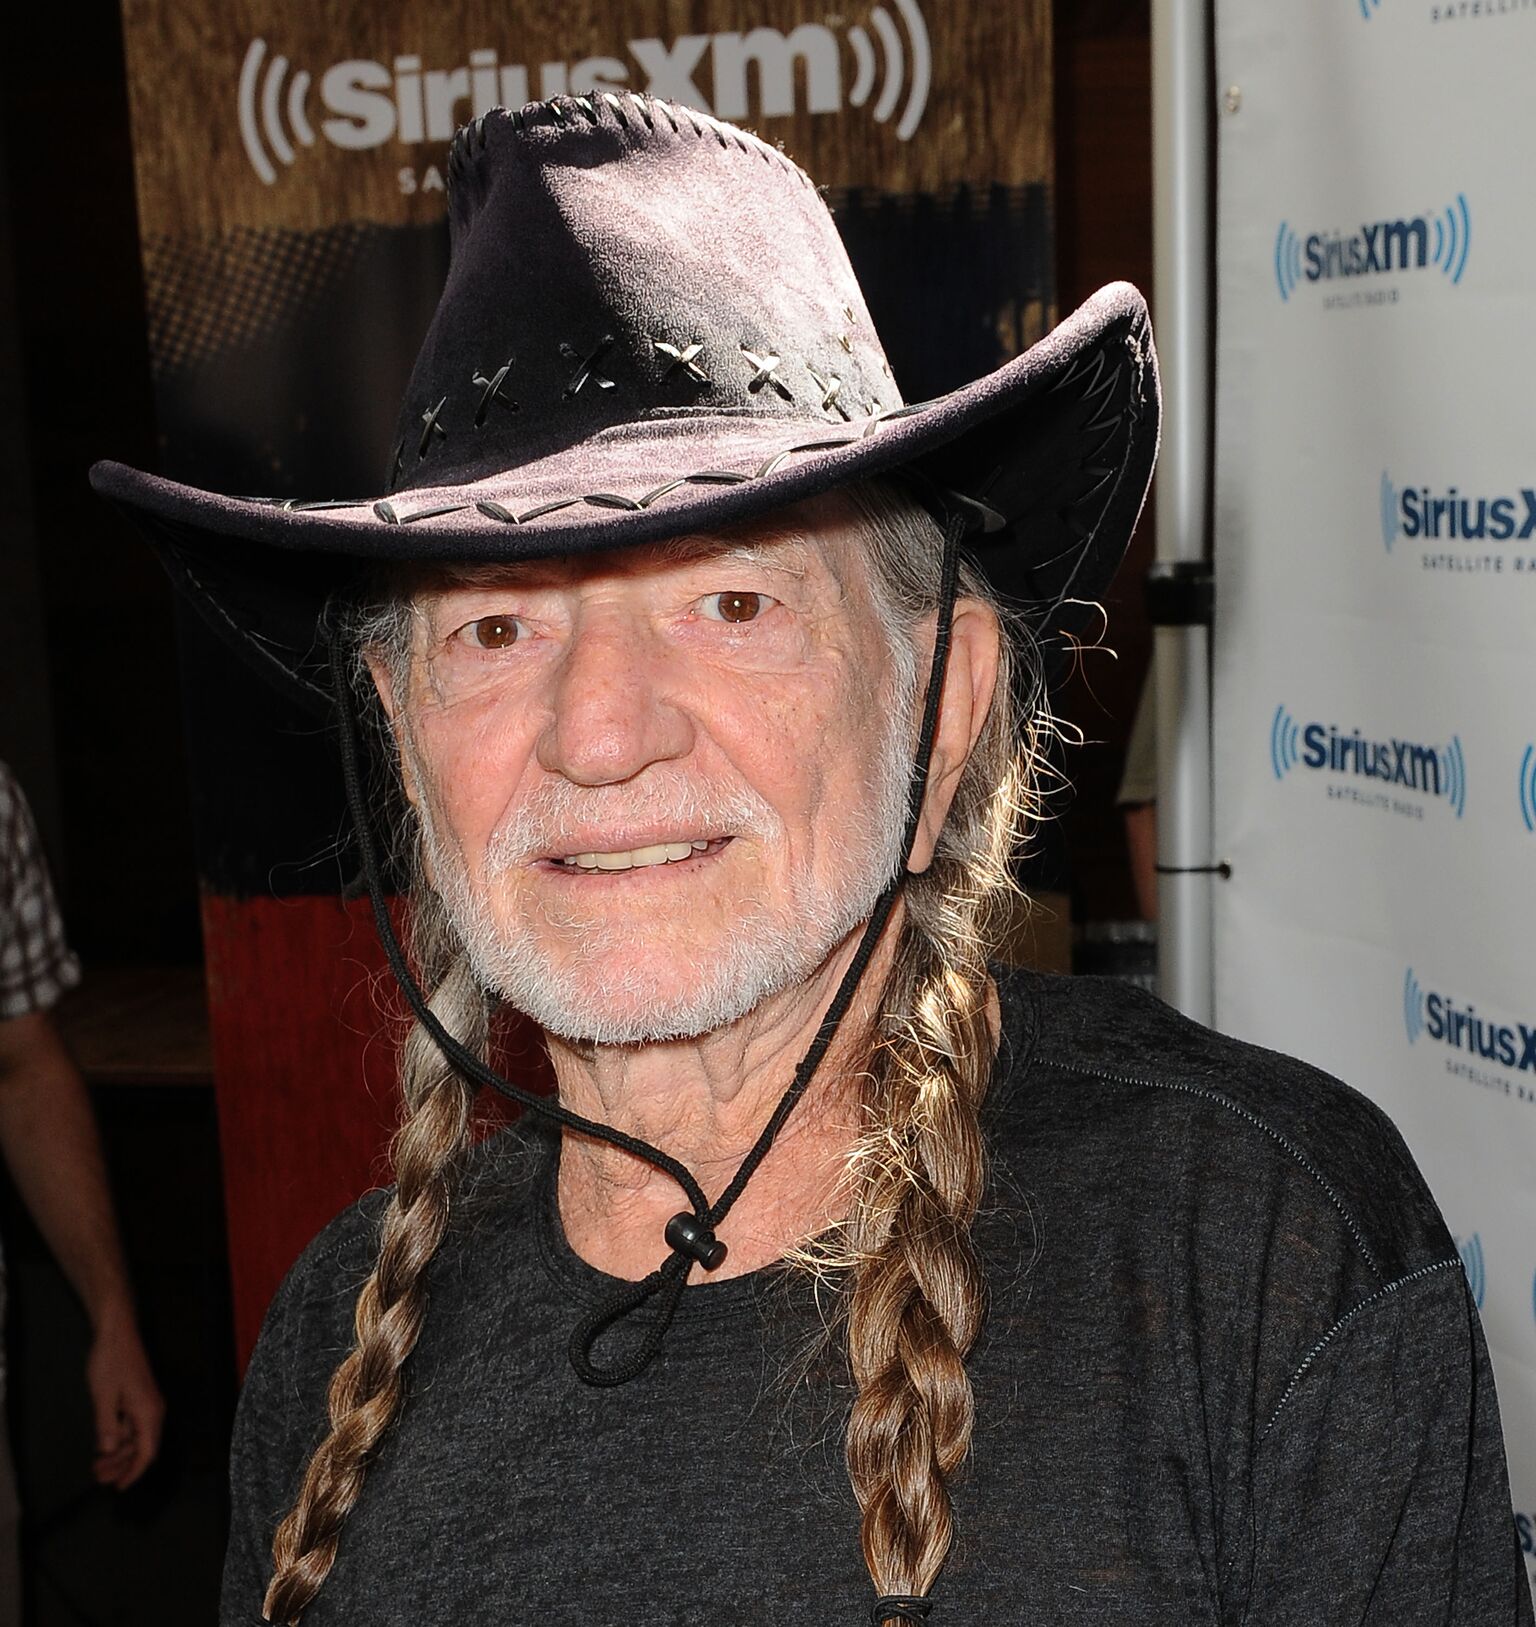 Country music legend Willie Nelson on the red carpet as SiriusXM | Getty Images